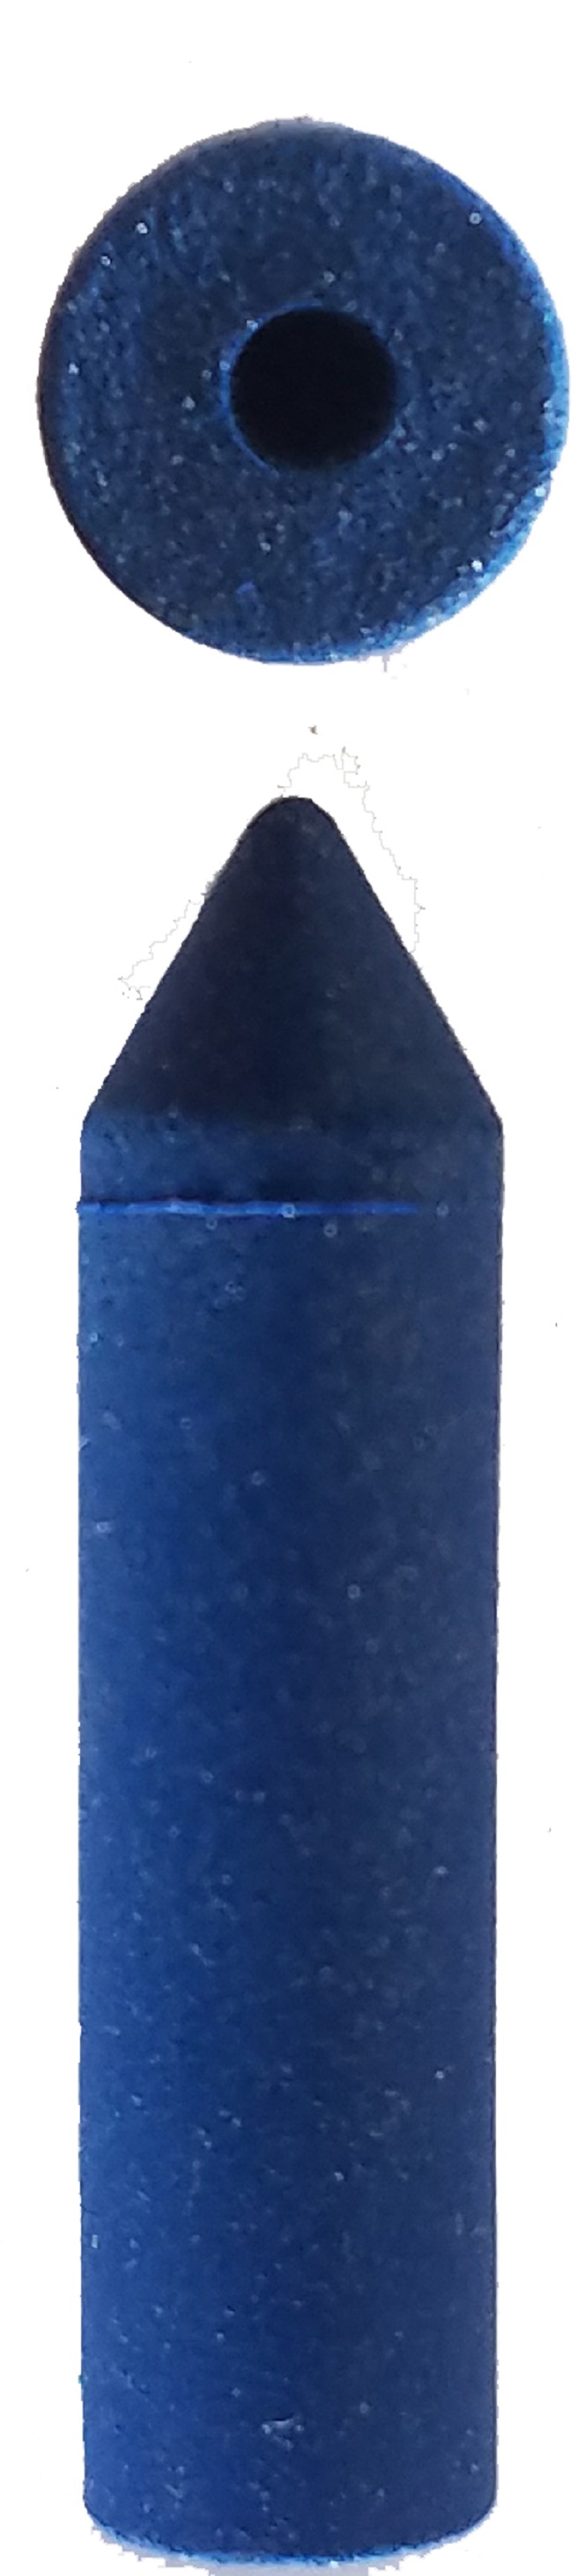 SUPER SILICON, BULLET, MEDIUM, blue , 6x24mm, EVE-GERMANY